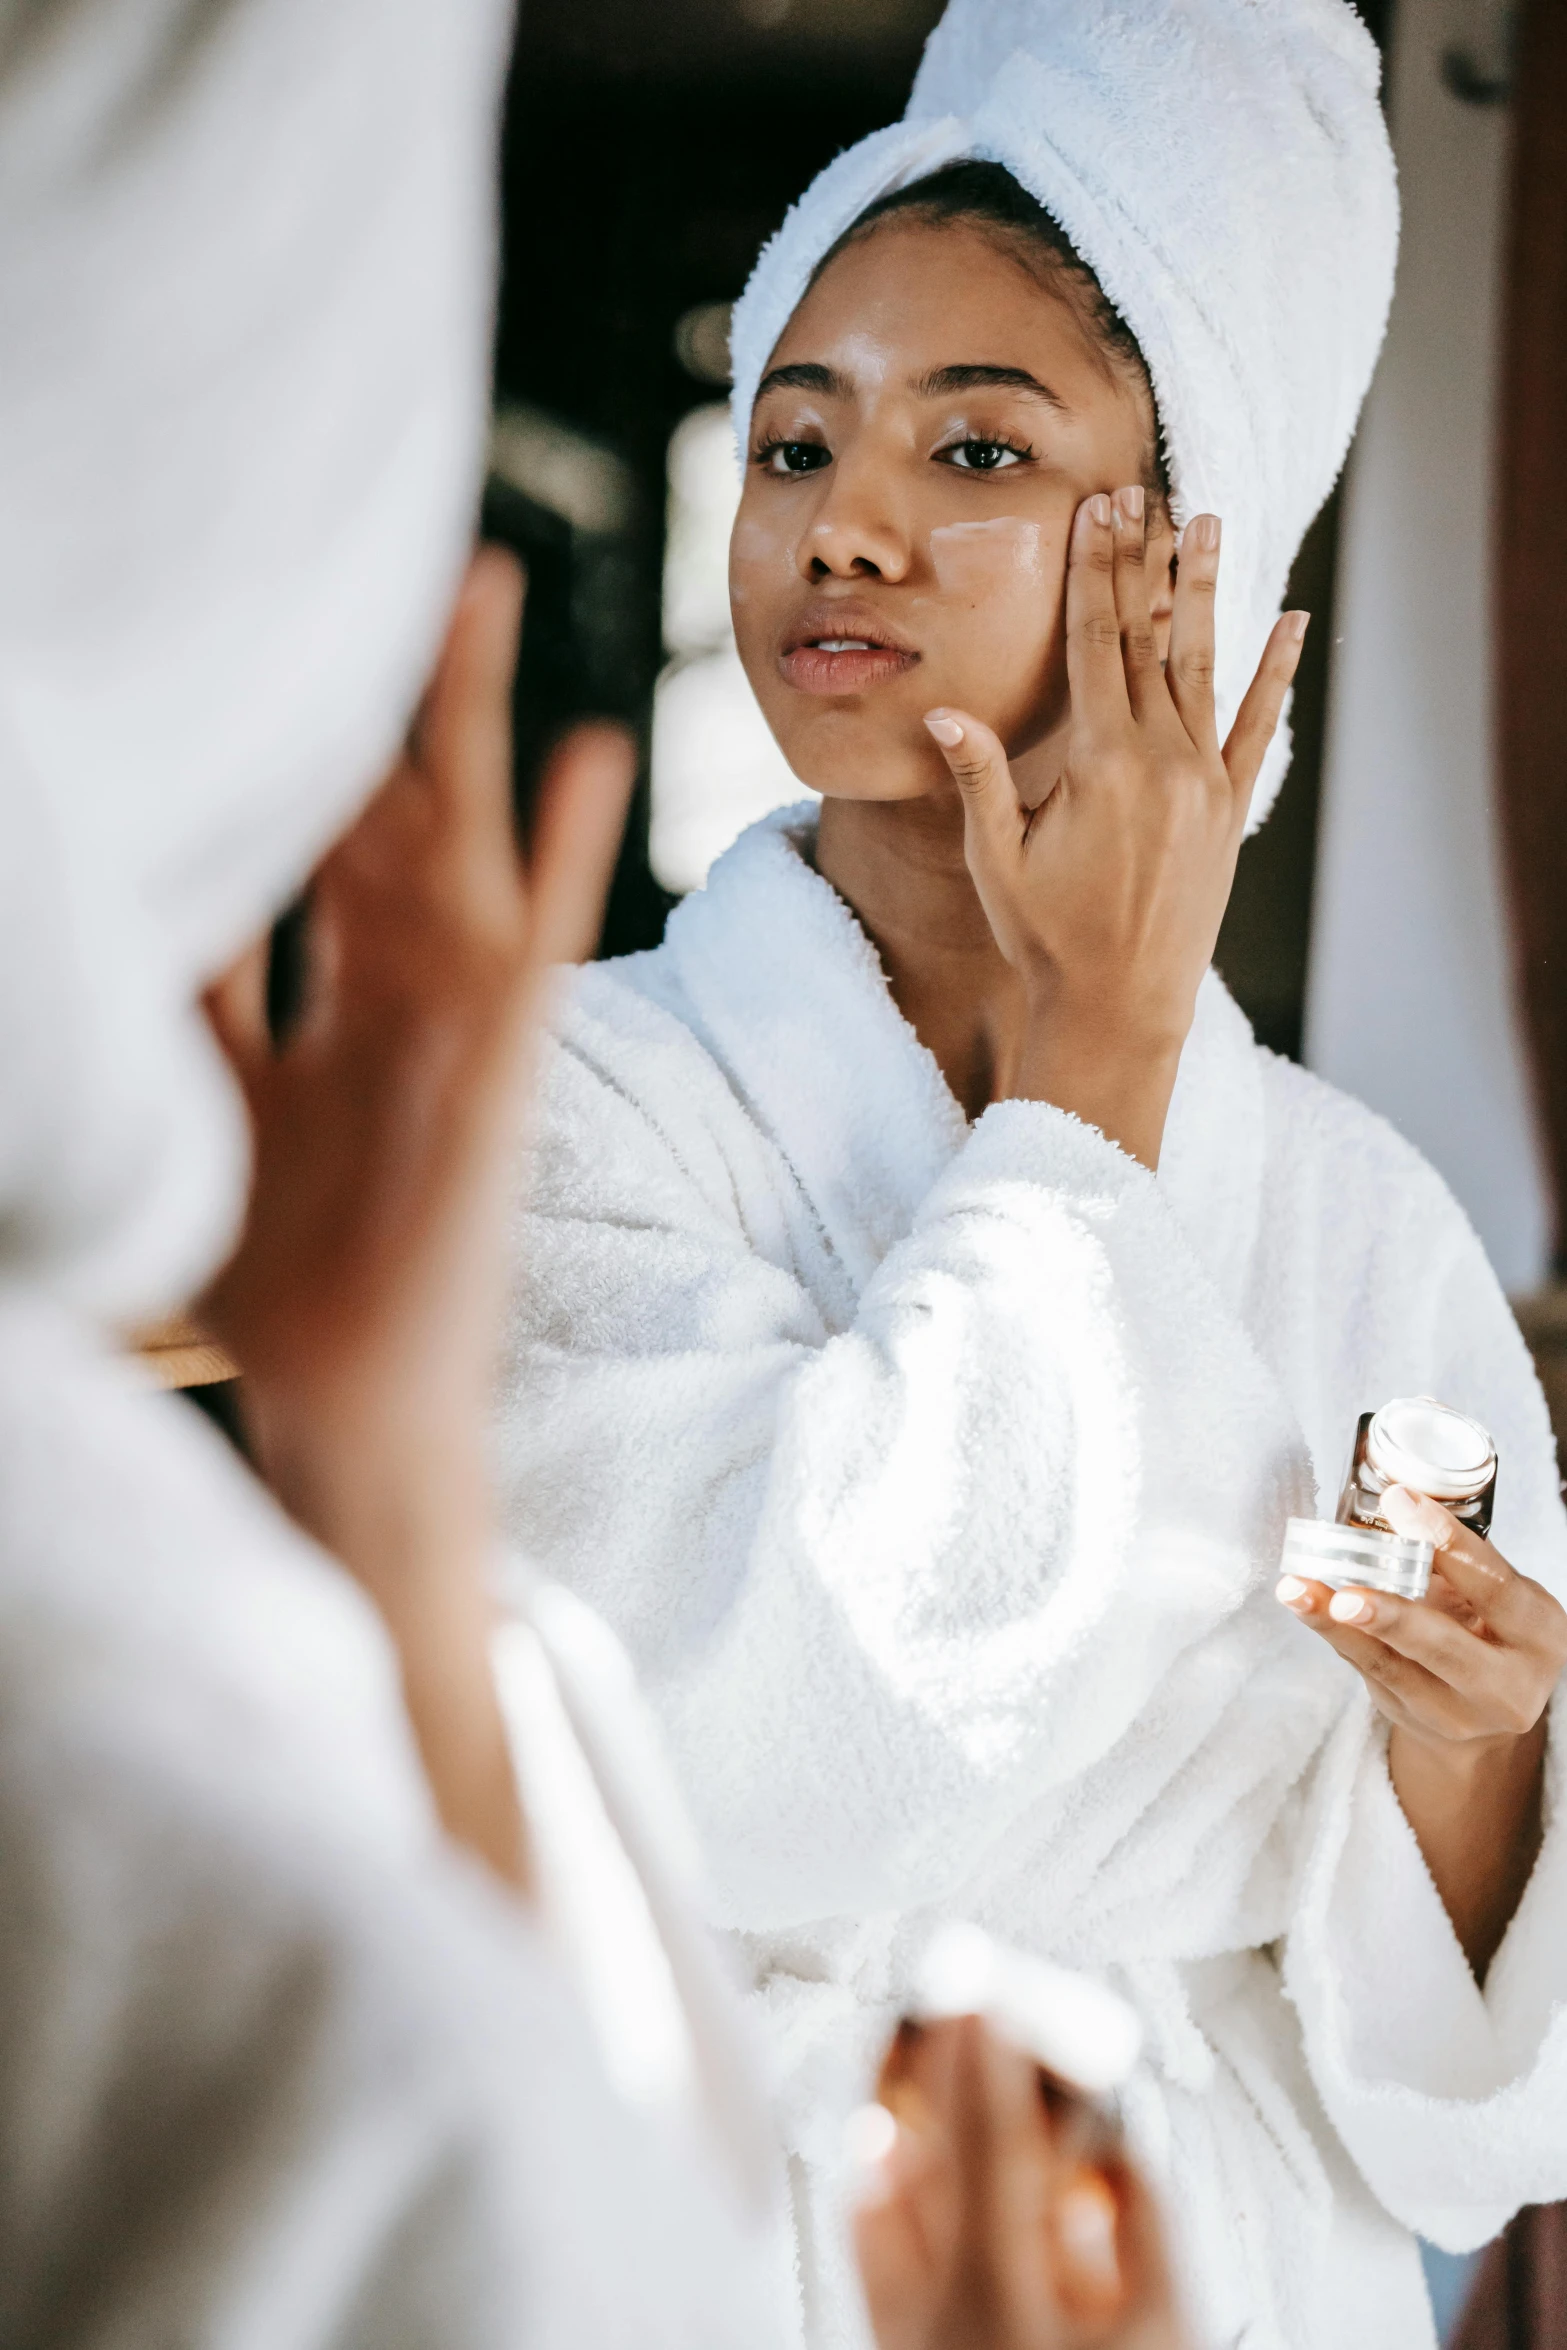 a woman that is standing in front of a mirror, wearing a white robe, smooth facial features, manuka, thumbnail